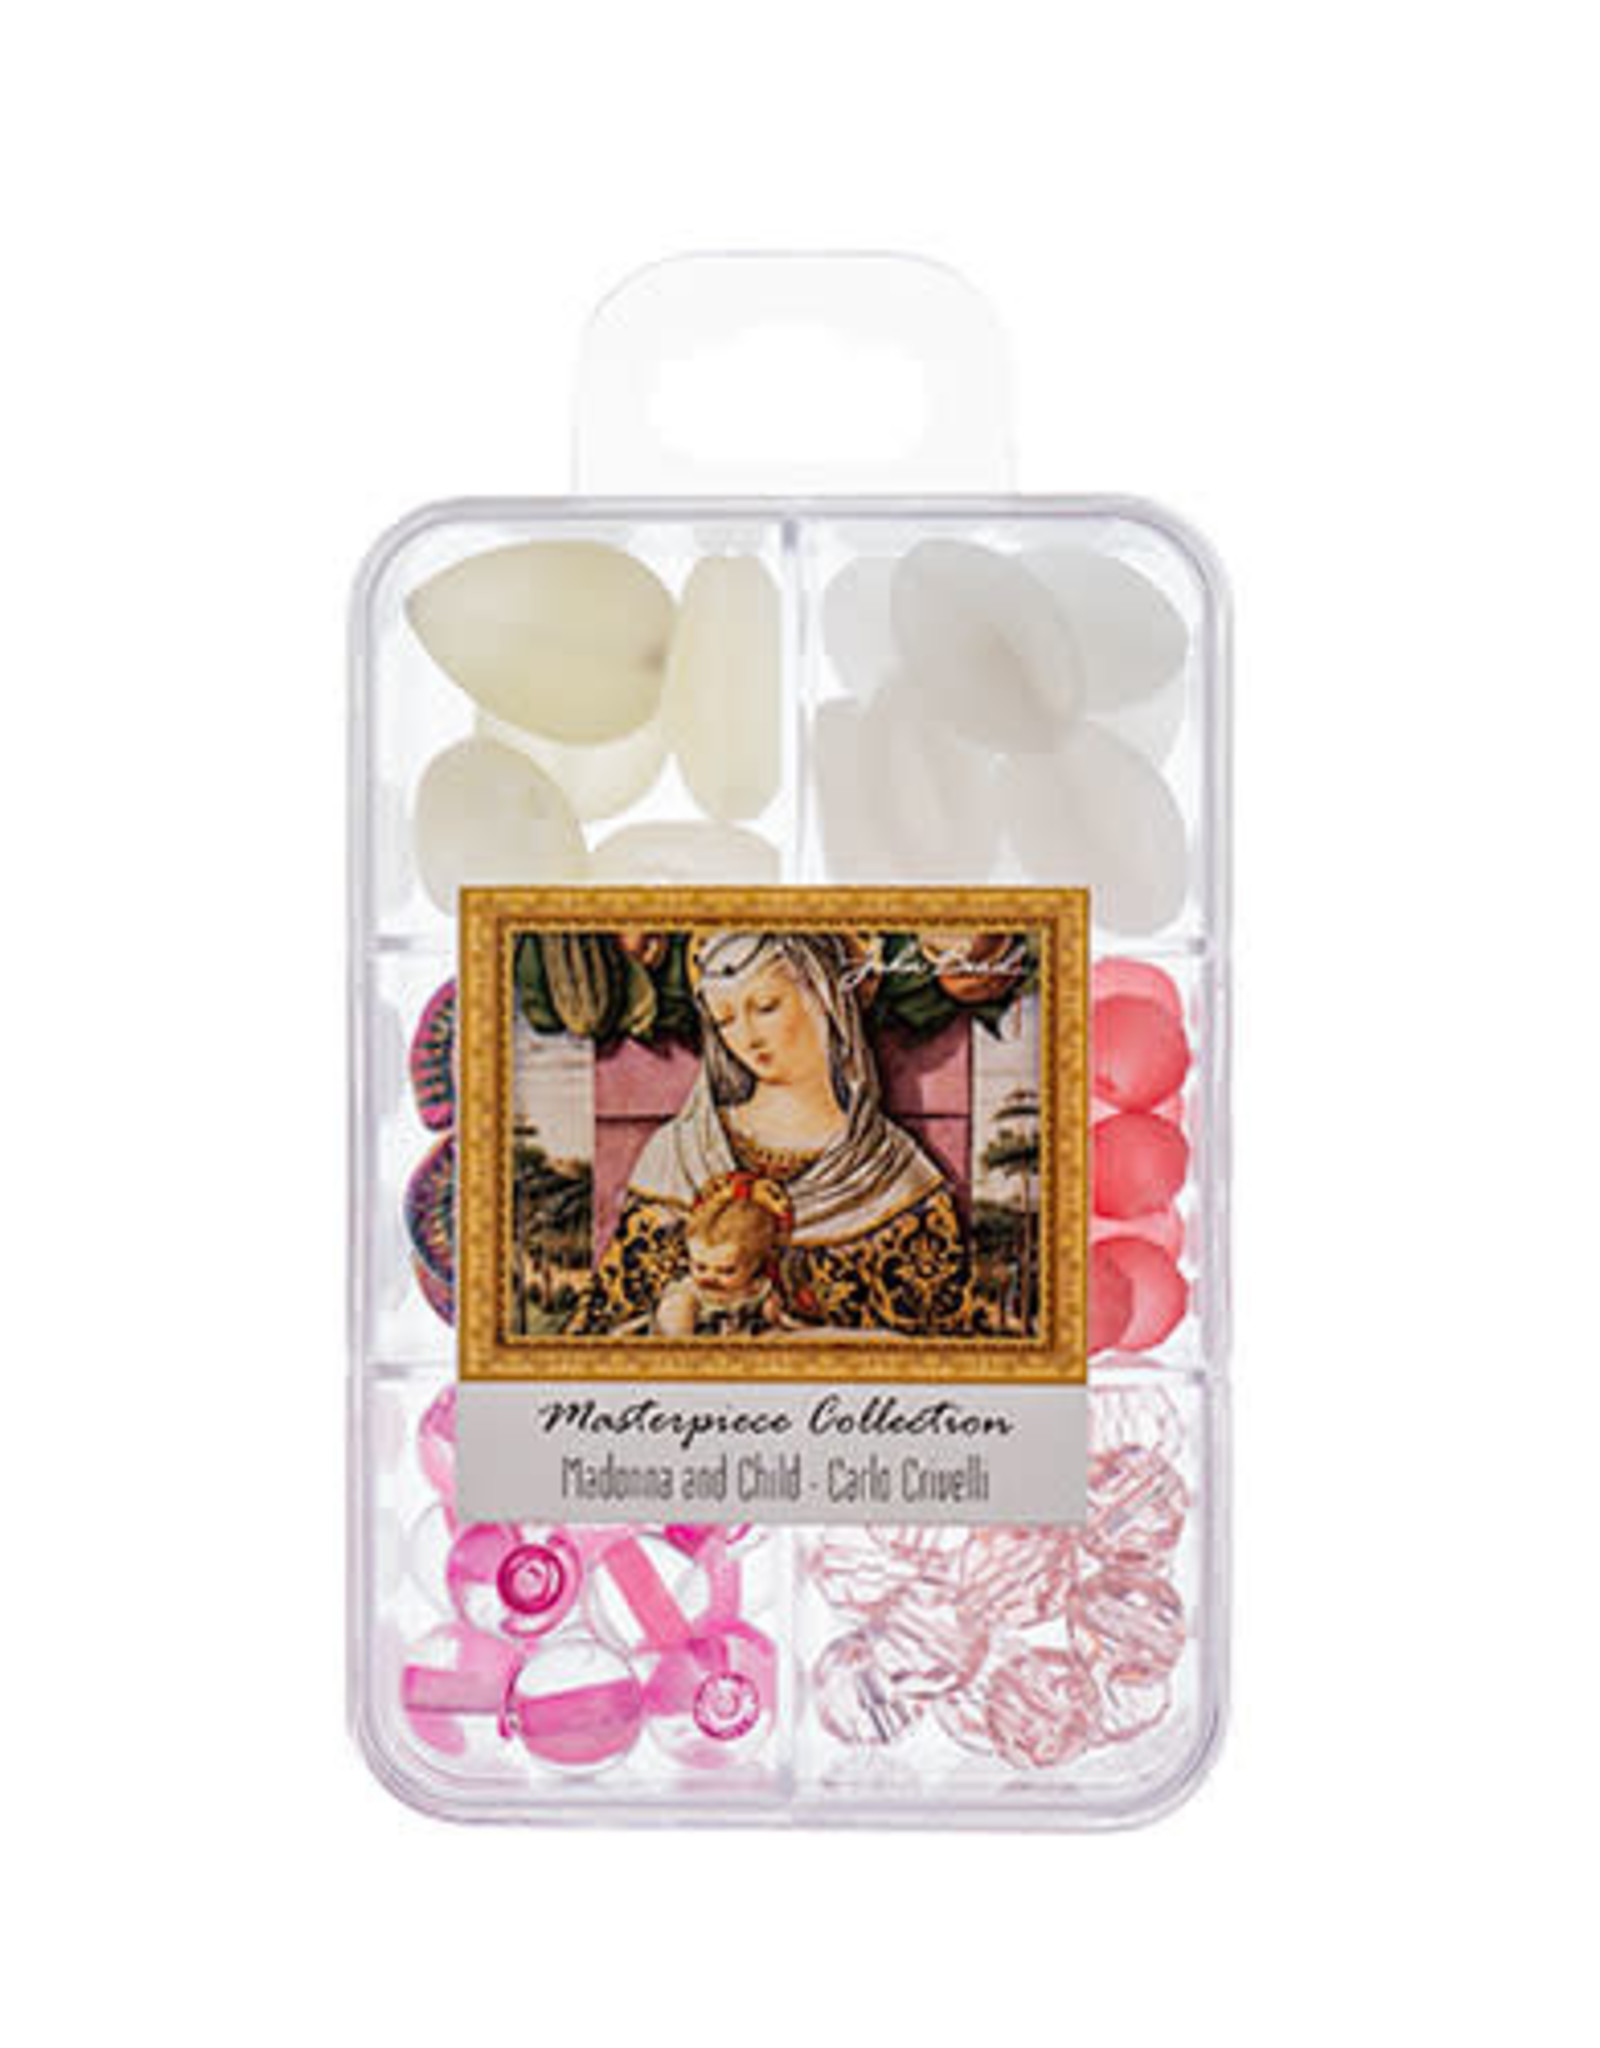 Masterpiece Collection Glass Beads Masterpiece Collection Glass Bead Box Mix apx85g Madonna and Child - Carlo Crivelli